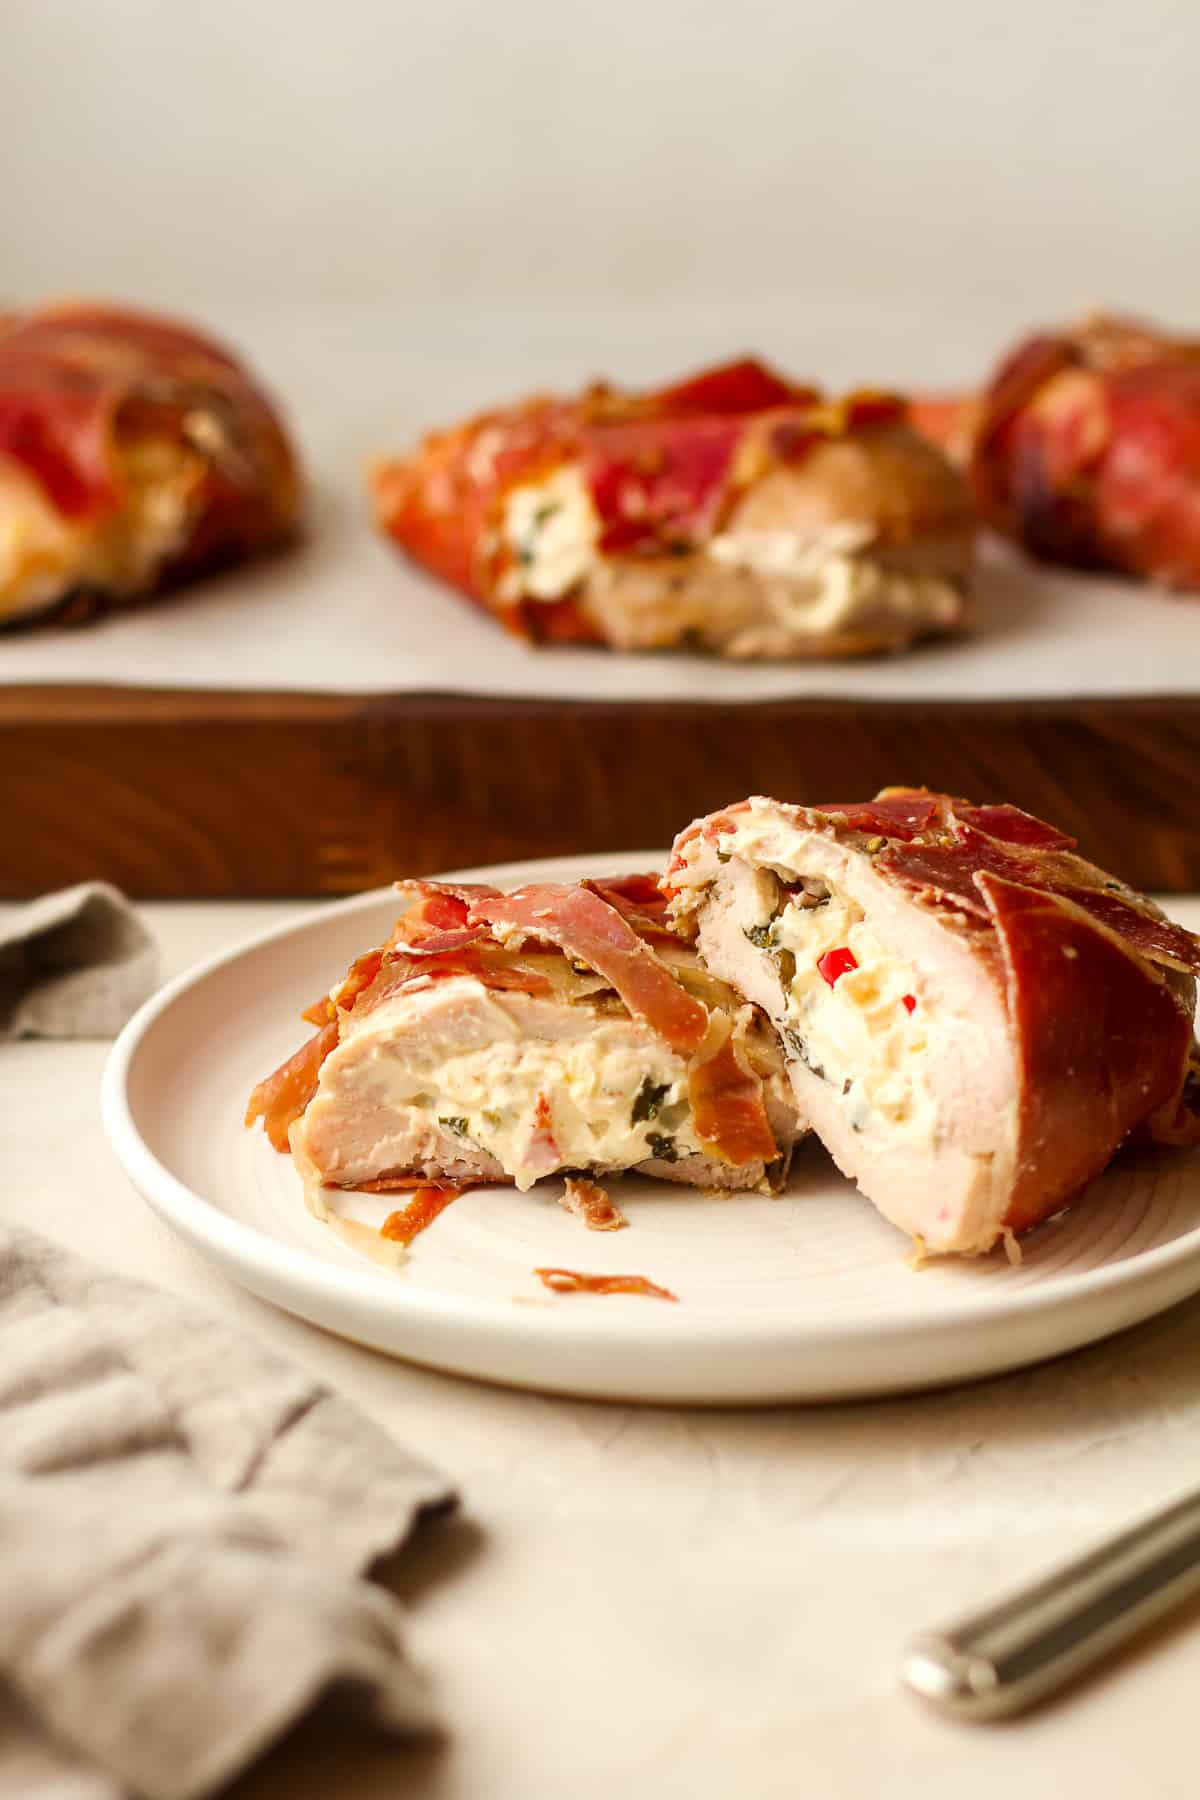 Side view of a plate of a halved parma wrapped chicken breast stuffed with goat cheese.